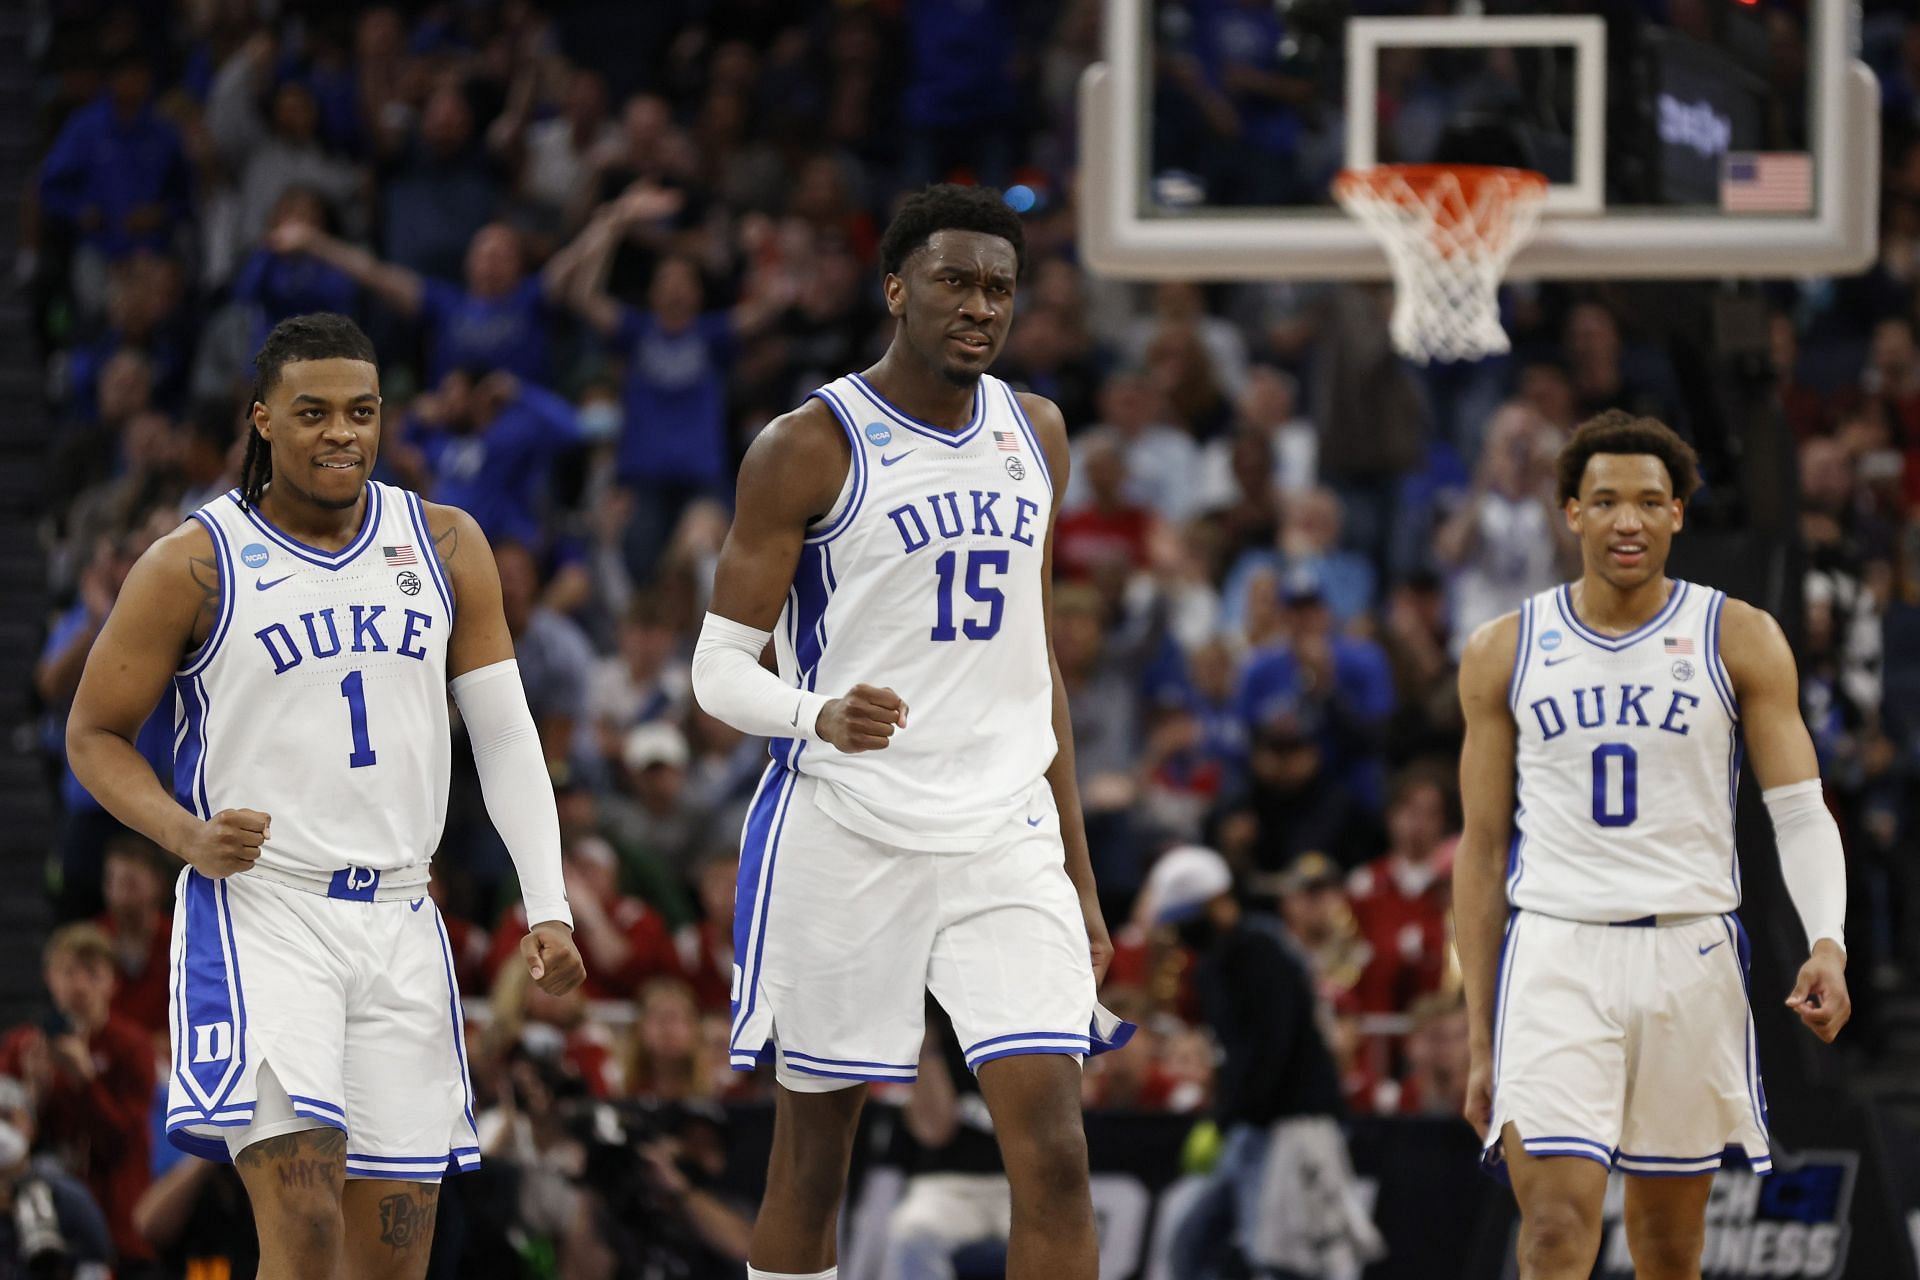 Duke is preparing for an anticipated rematch against North Carolina on Saturday.